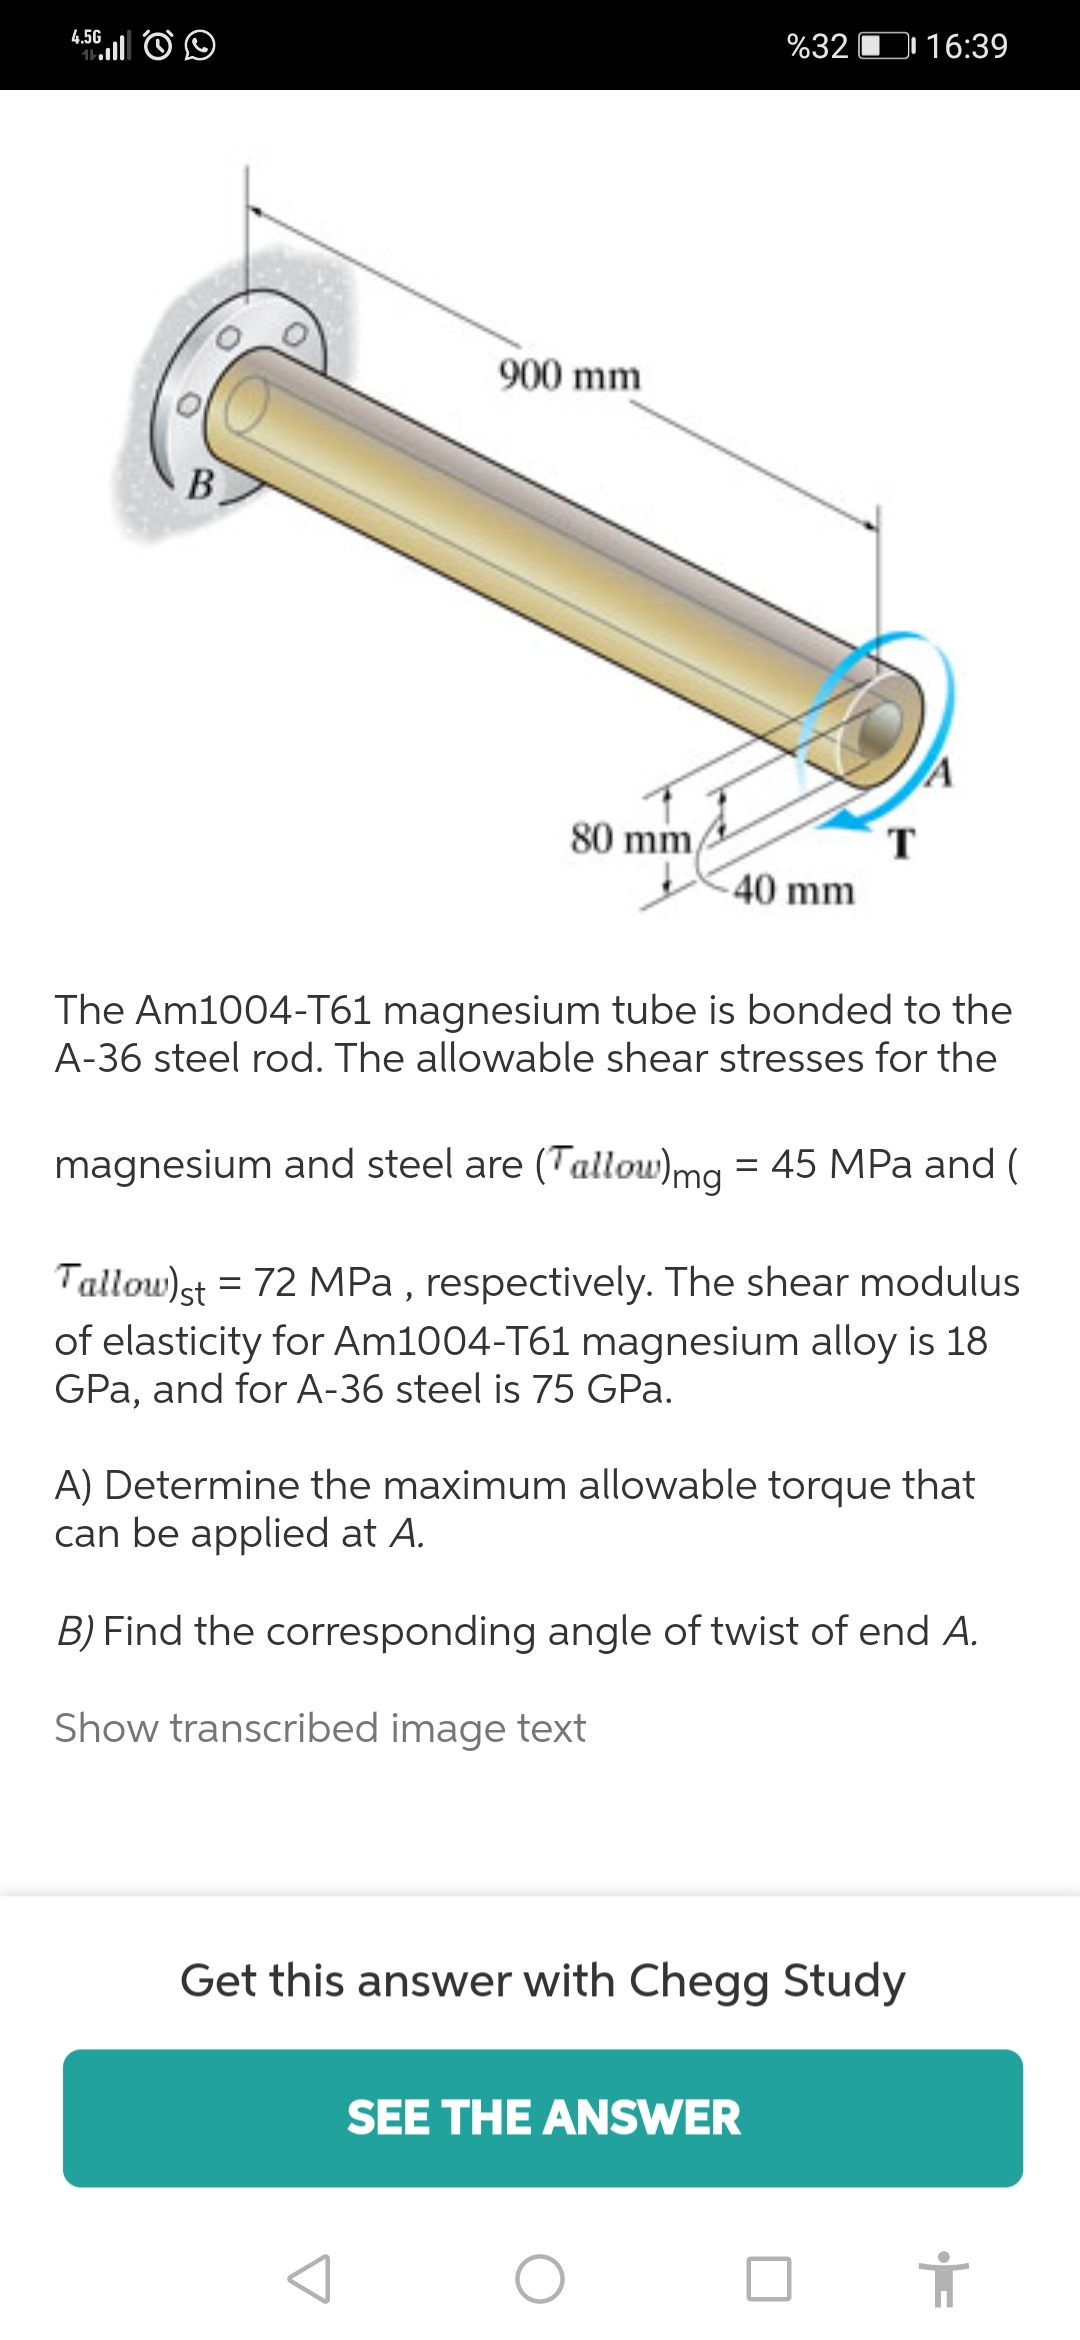 4.5G
%32 D 16:39
900 mm
В
80 mm
T.
40 mm
The Am1004-T61 magnesium tube is bonded to the
A-36 steel rod. The allowable shear stresses for the
magnesium and steel are (Tallow)mg = 45 MPa and (
Tallow)st = 72 MPa , respectively. The shear modulus
of elasticity for Am1004-T61 magnesium alloy is 18
GPa, and for A-36 steel is 75 GPa.
A) Determine the maximum allowable torque that
can be applied at A.
B) Find the corresponding angle of twist of end A.
Show transcribed image text
Get this answer with Chegg Study
SEE THE ANSWER
